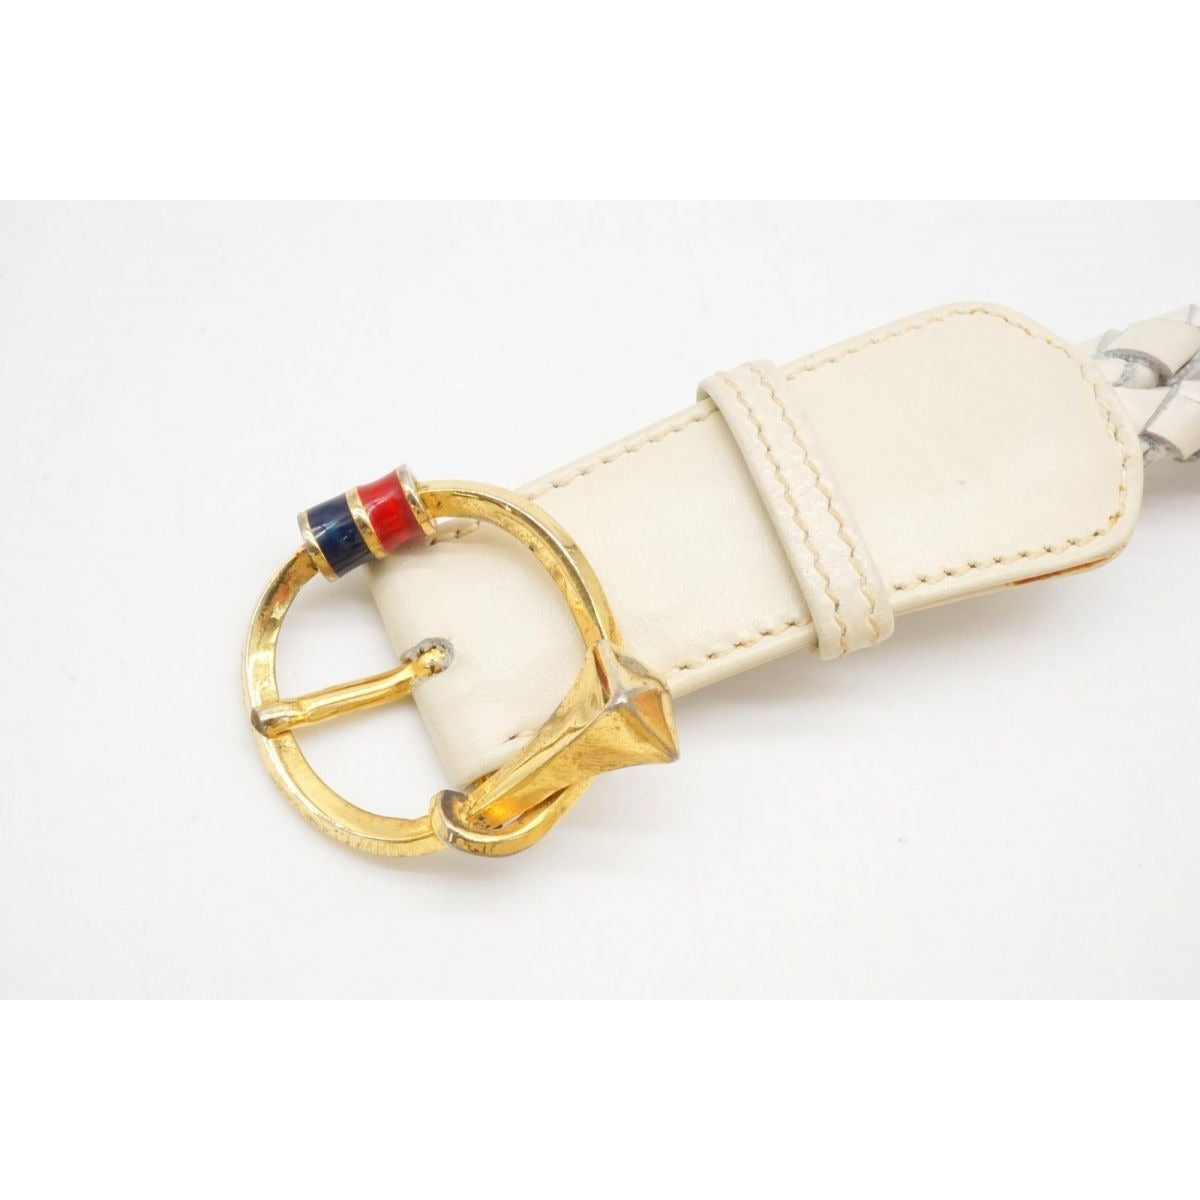 vintage, Gucci, size 80/32, white leather belt with a round, gold buckle with red and blue enamel & two braided leather strands